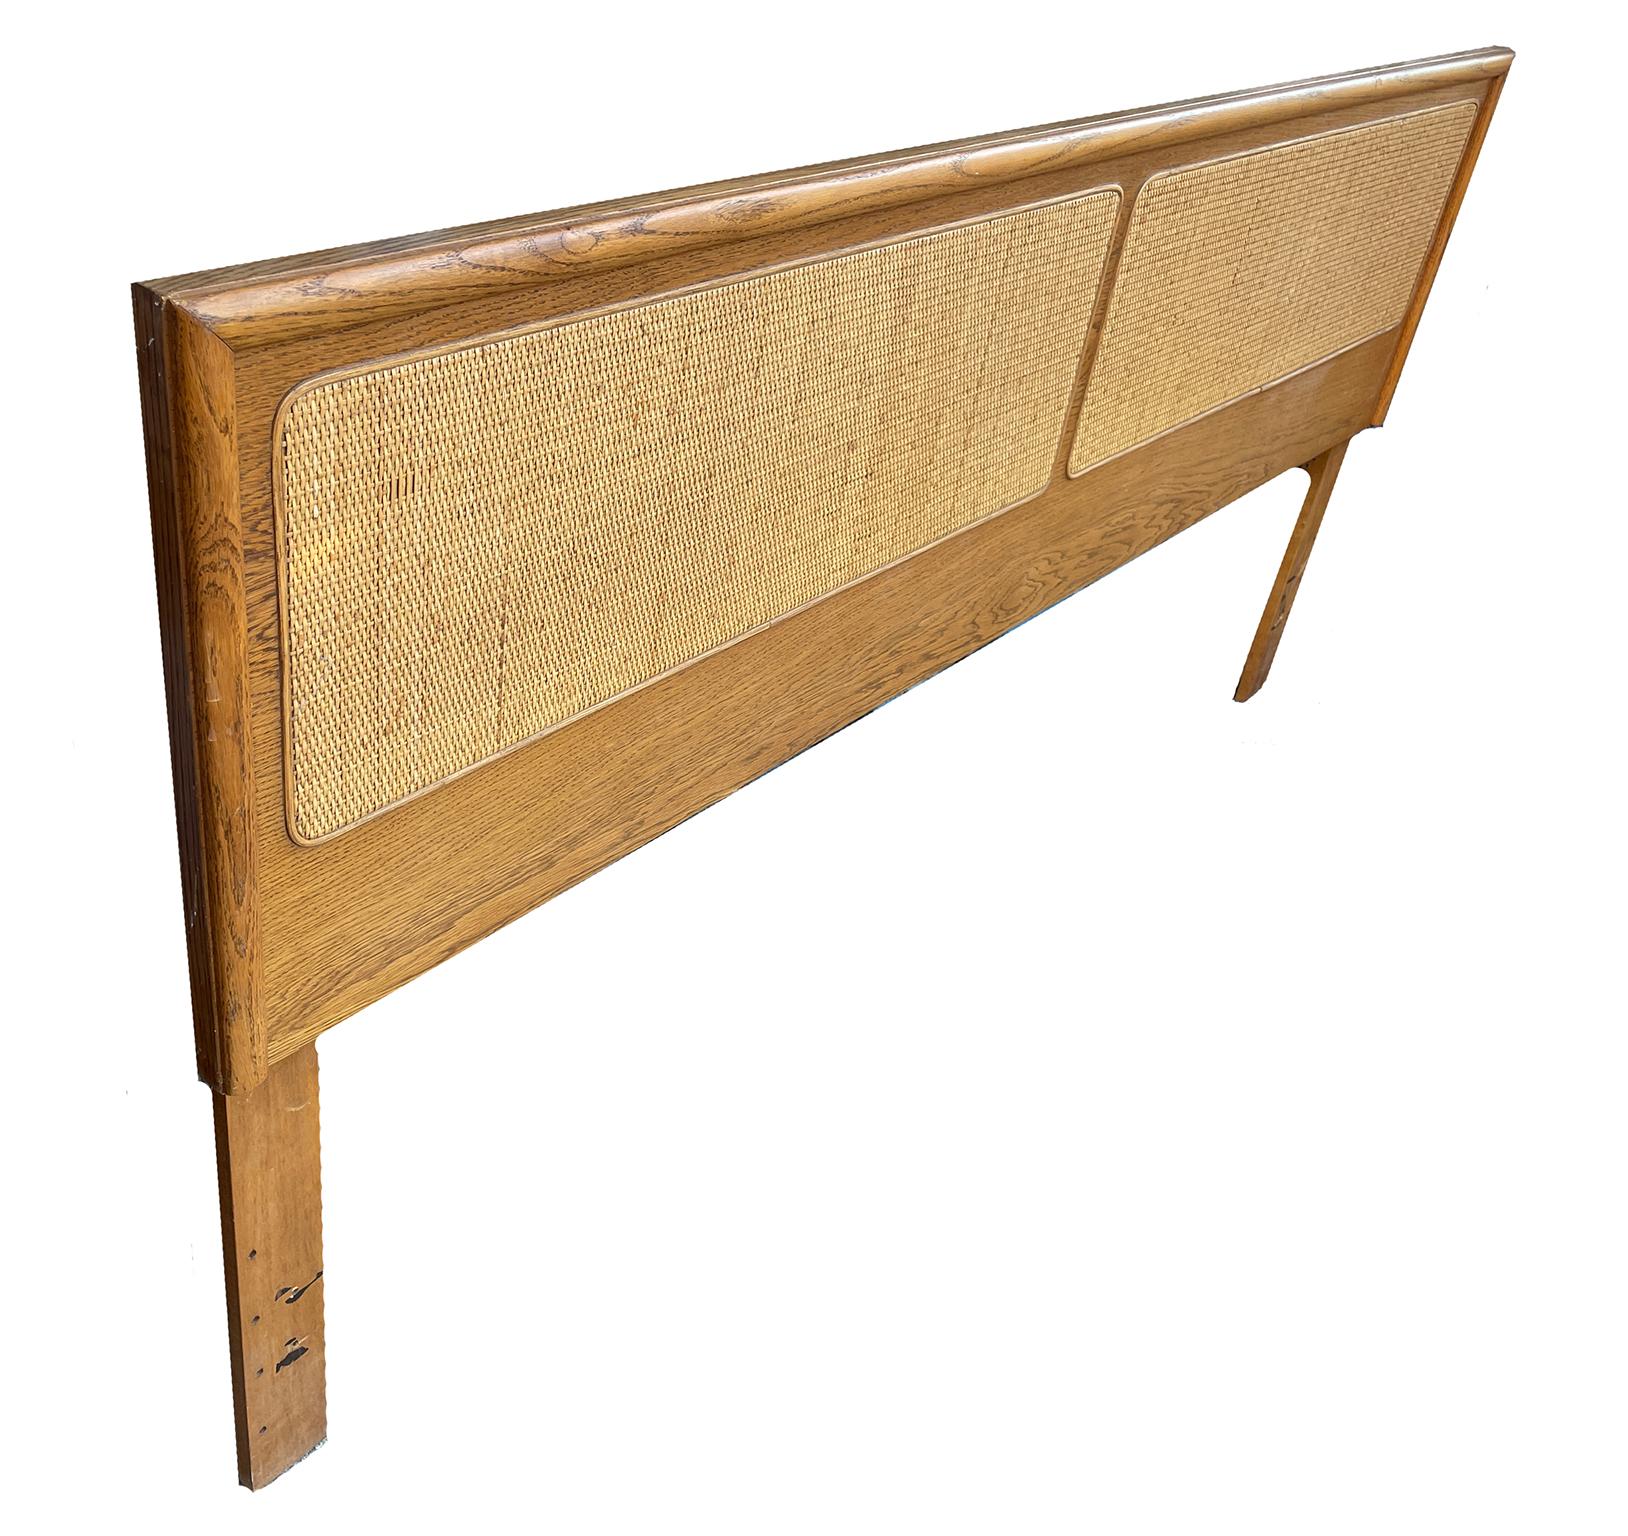 Caning Mid-Century Modern Oak and Cane King Bed Headboard by Lane For Sale